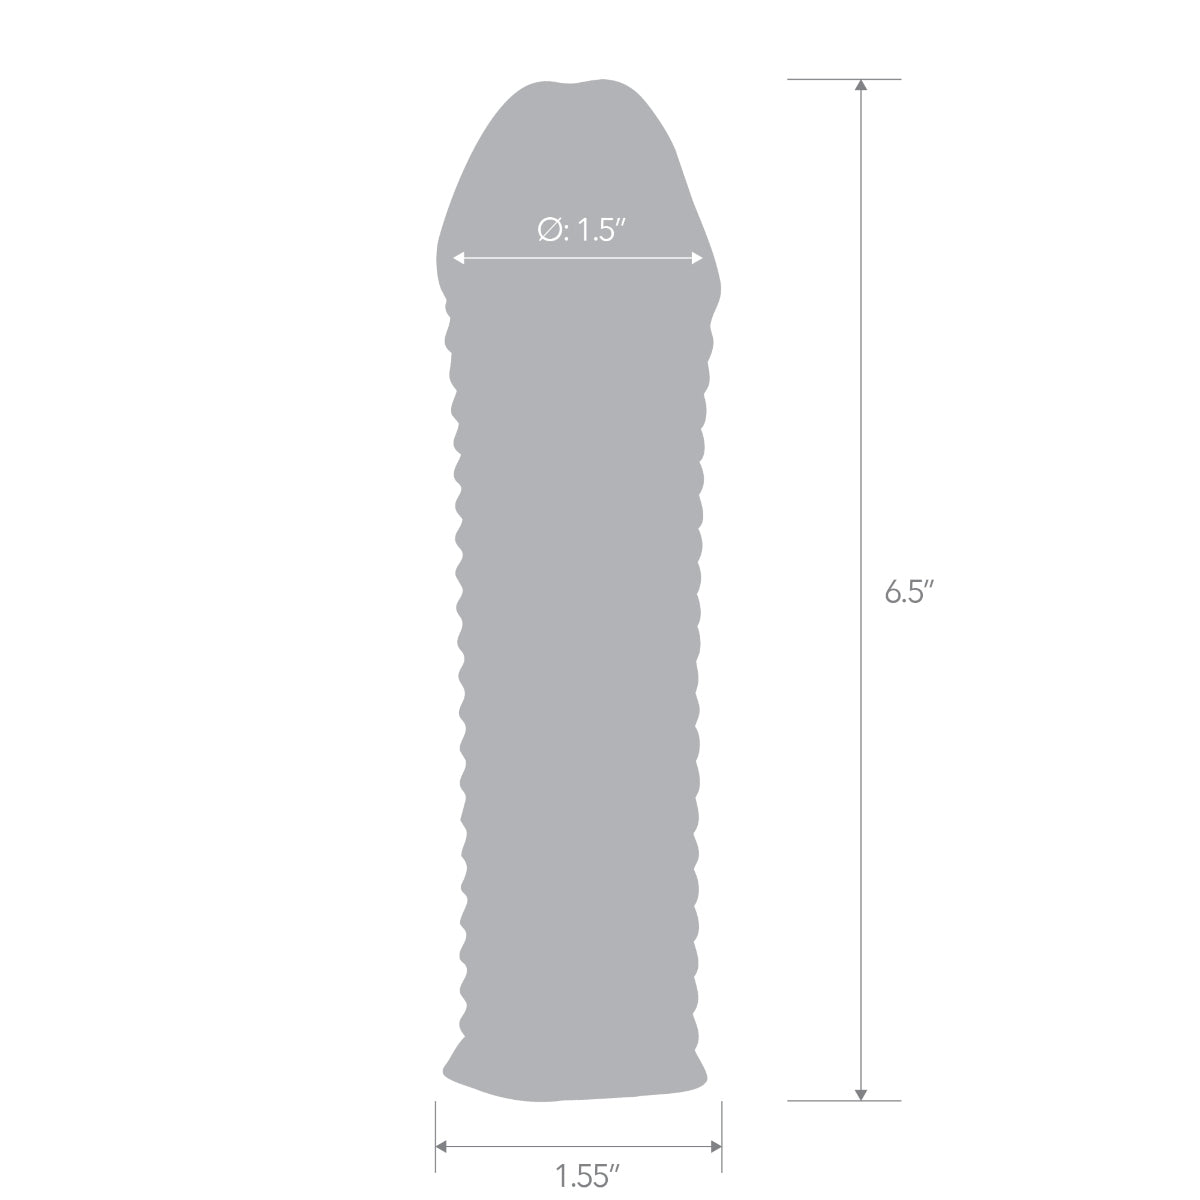 Blue Line Clear Textured Penis Enhancing Sleeve Extension 6.5 Inch - Simply Pleasure